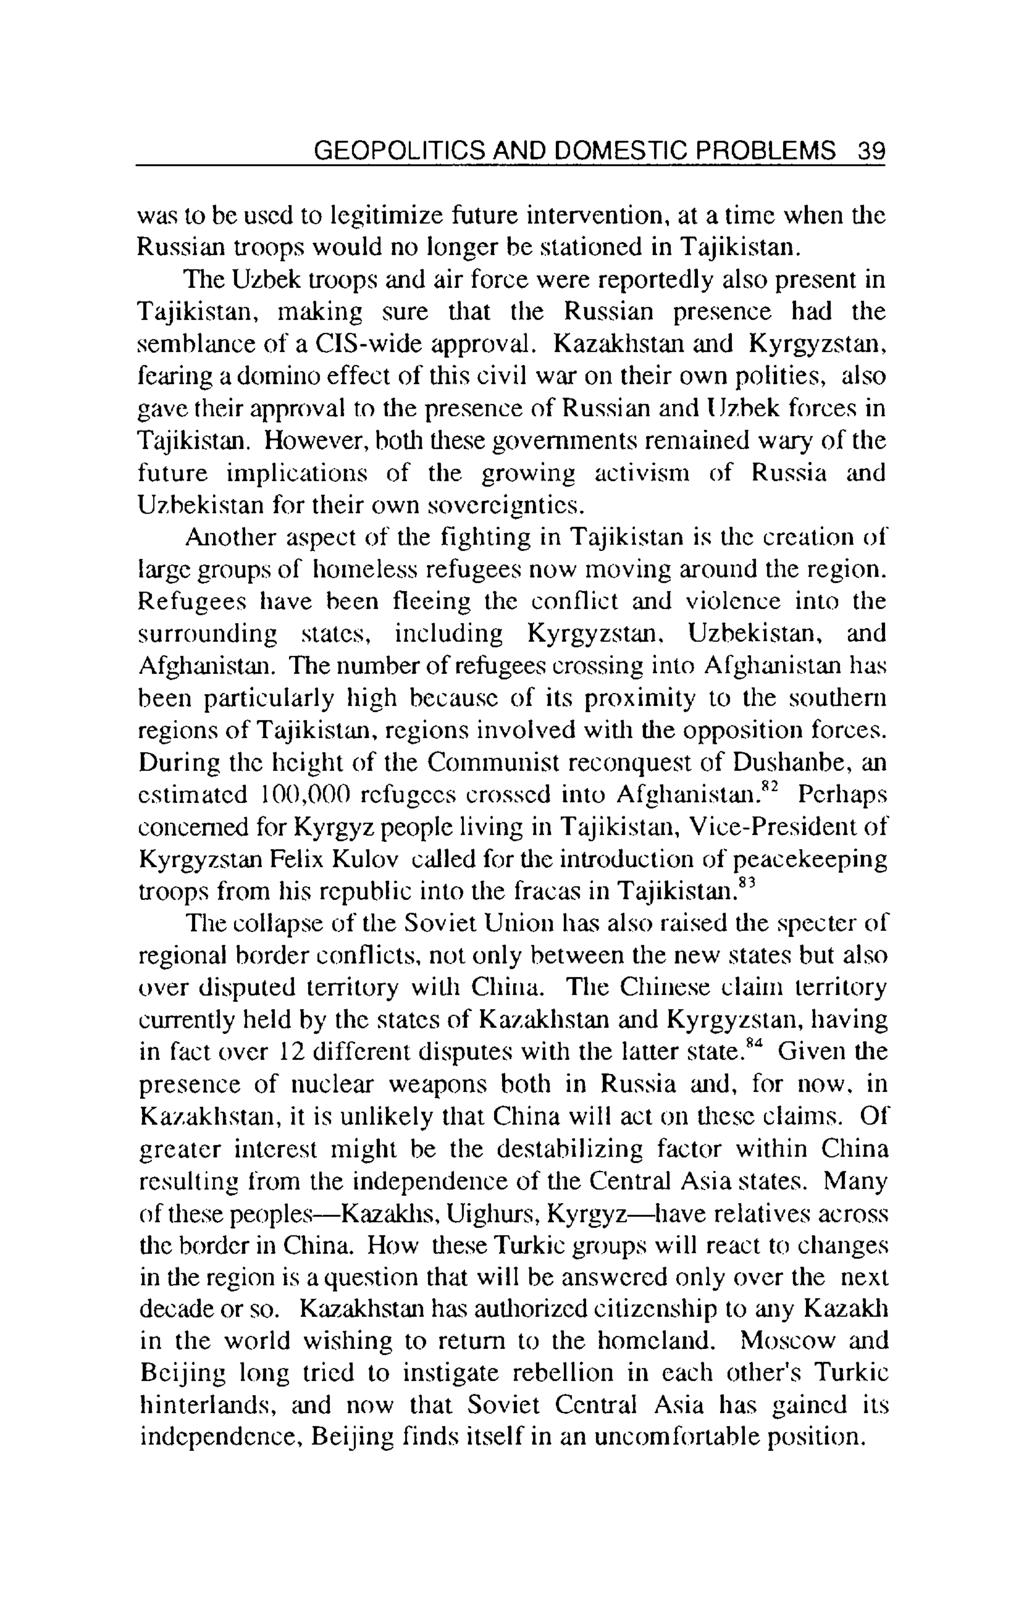 GEOPOLITICS AND DOMESTIC PROBLEMS 39 was to be used to legitimize future intervention, at a time when wlien the tlie Russian troops would no longer be stationed in Tajikistan.